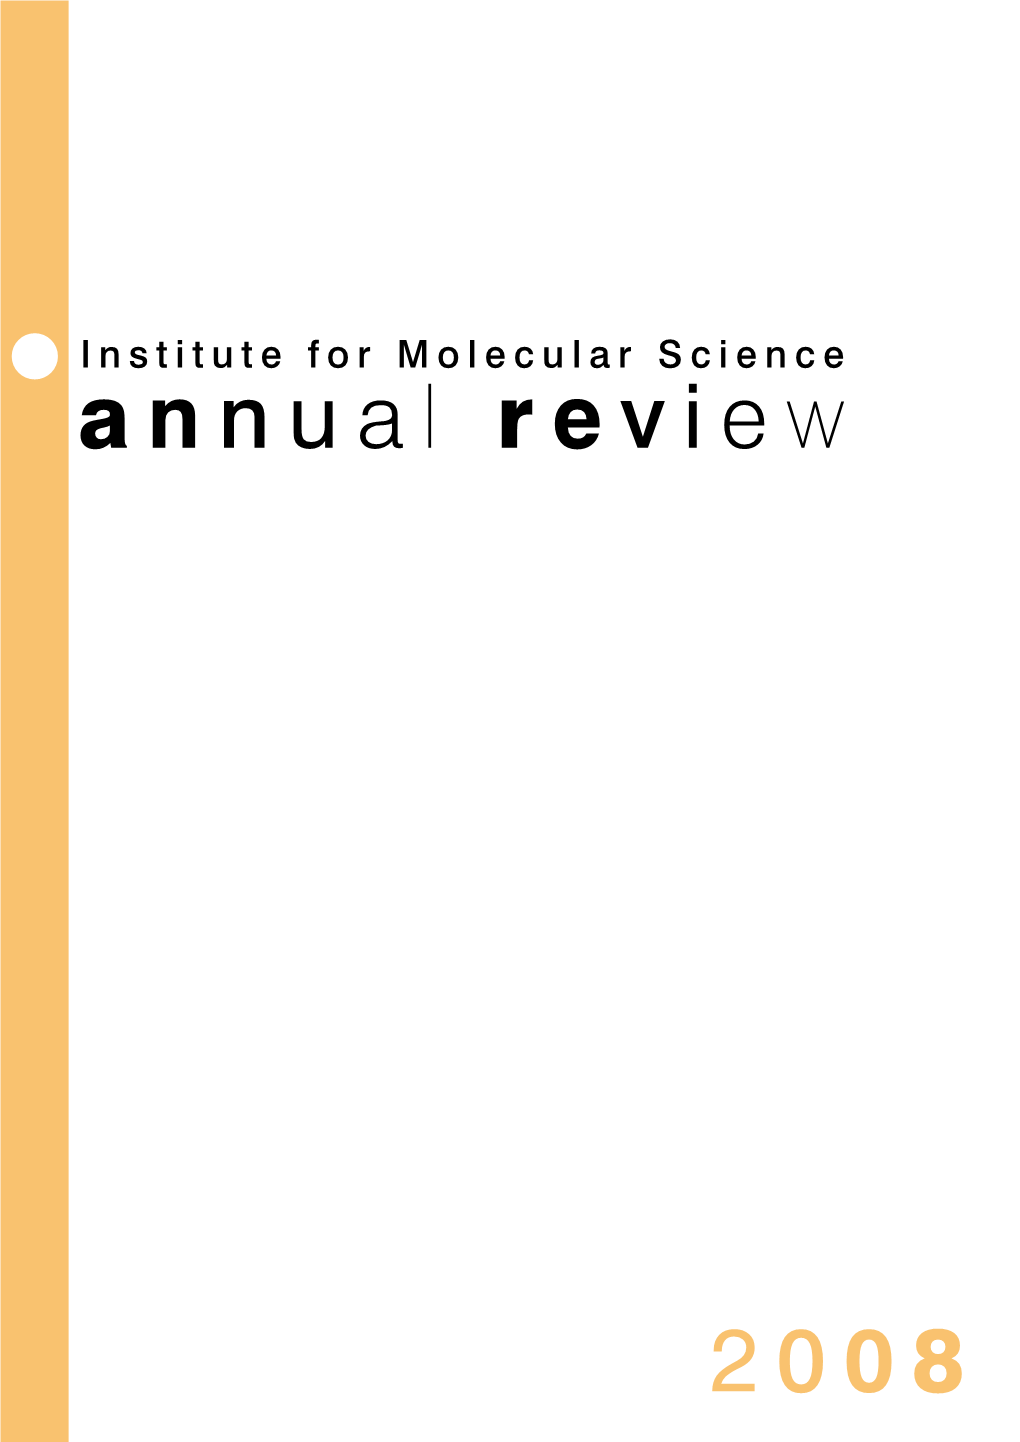 Annual Review 2008 from the DIRECTOR-GENERAL